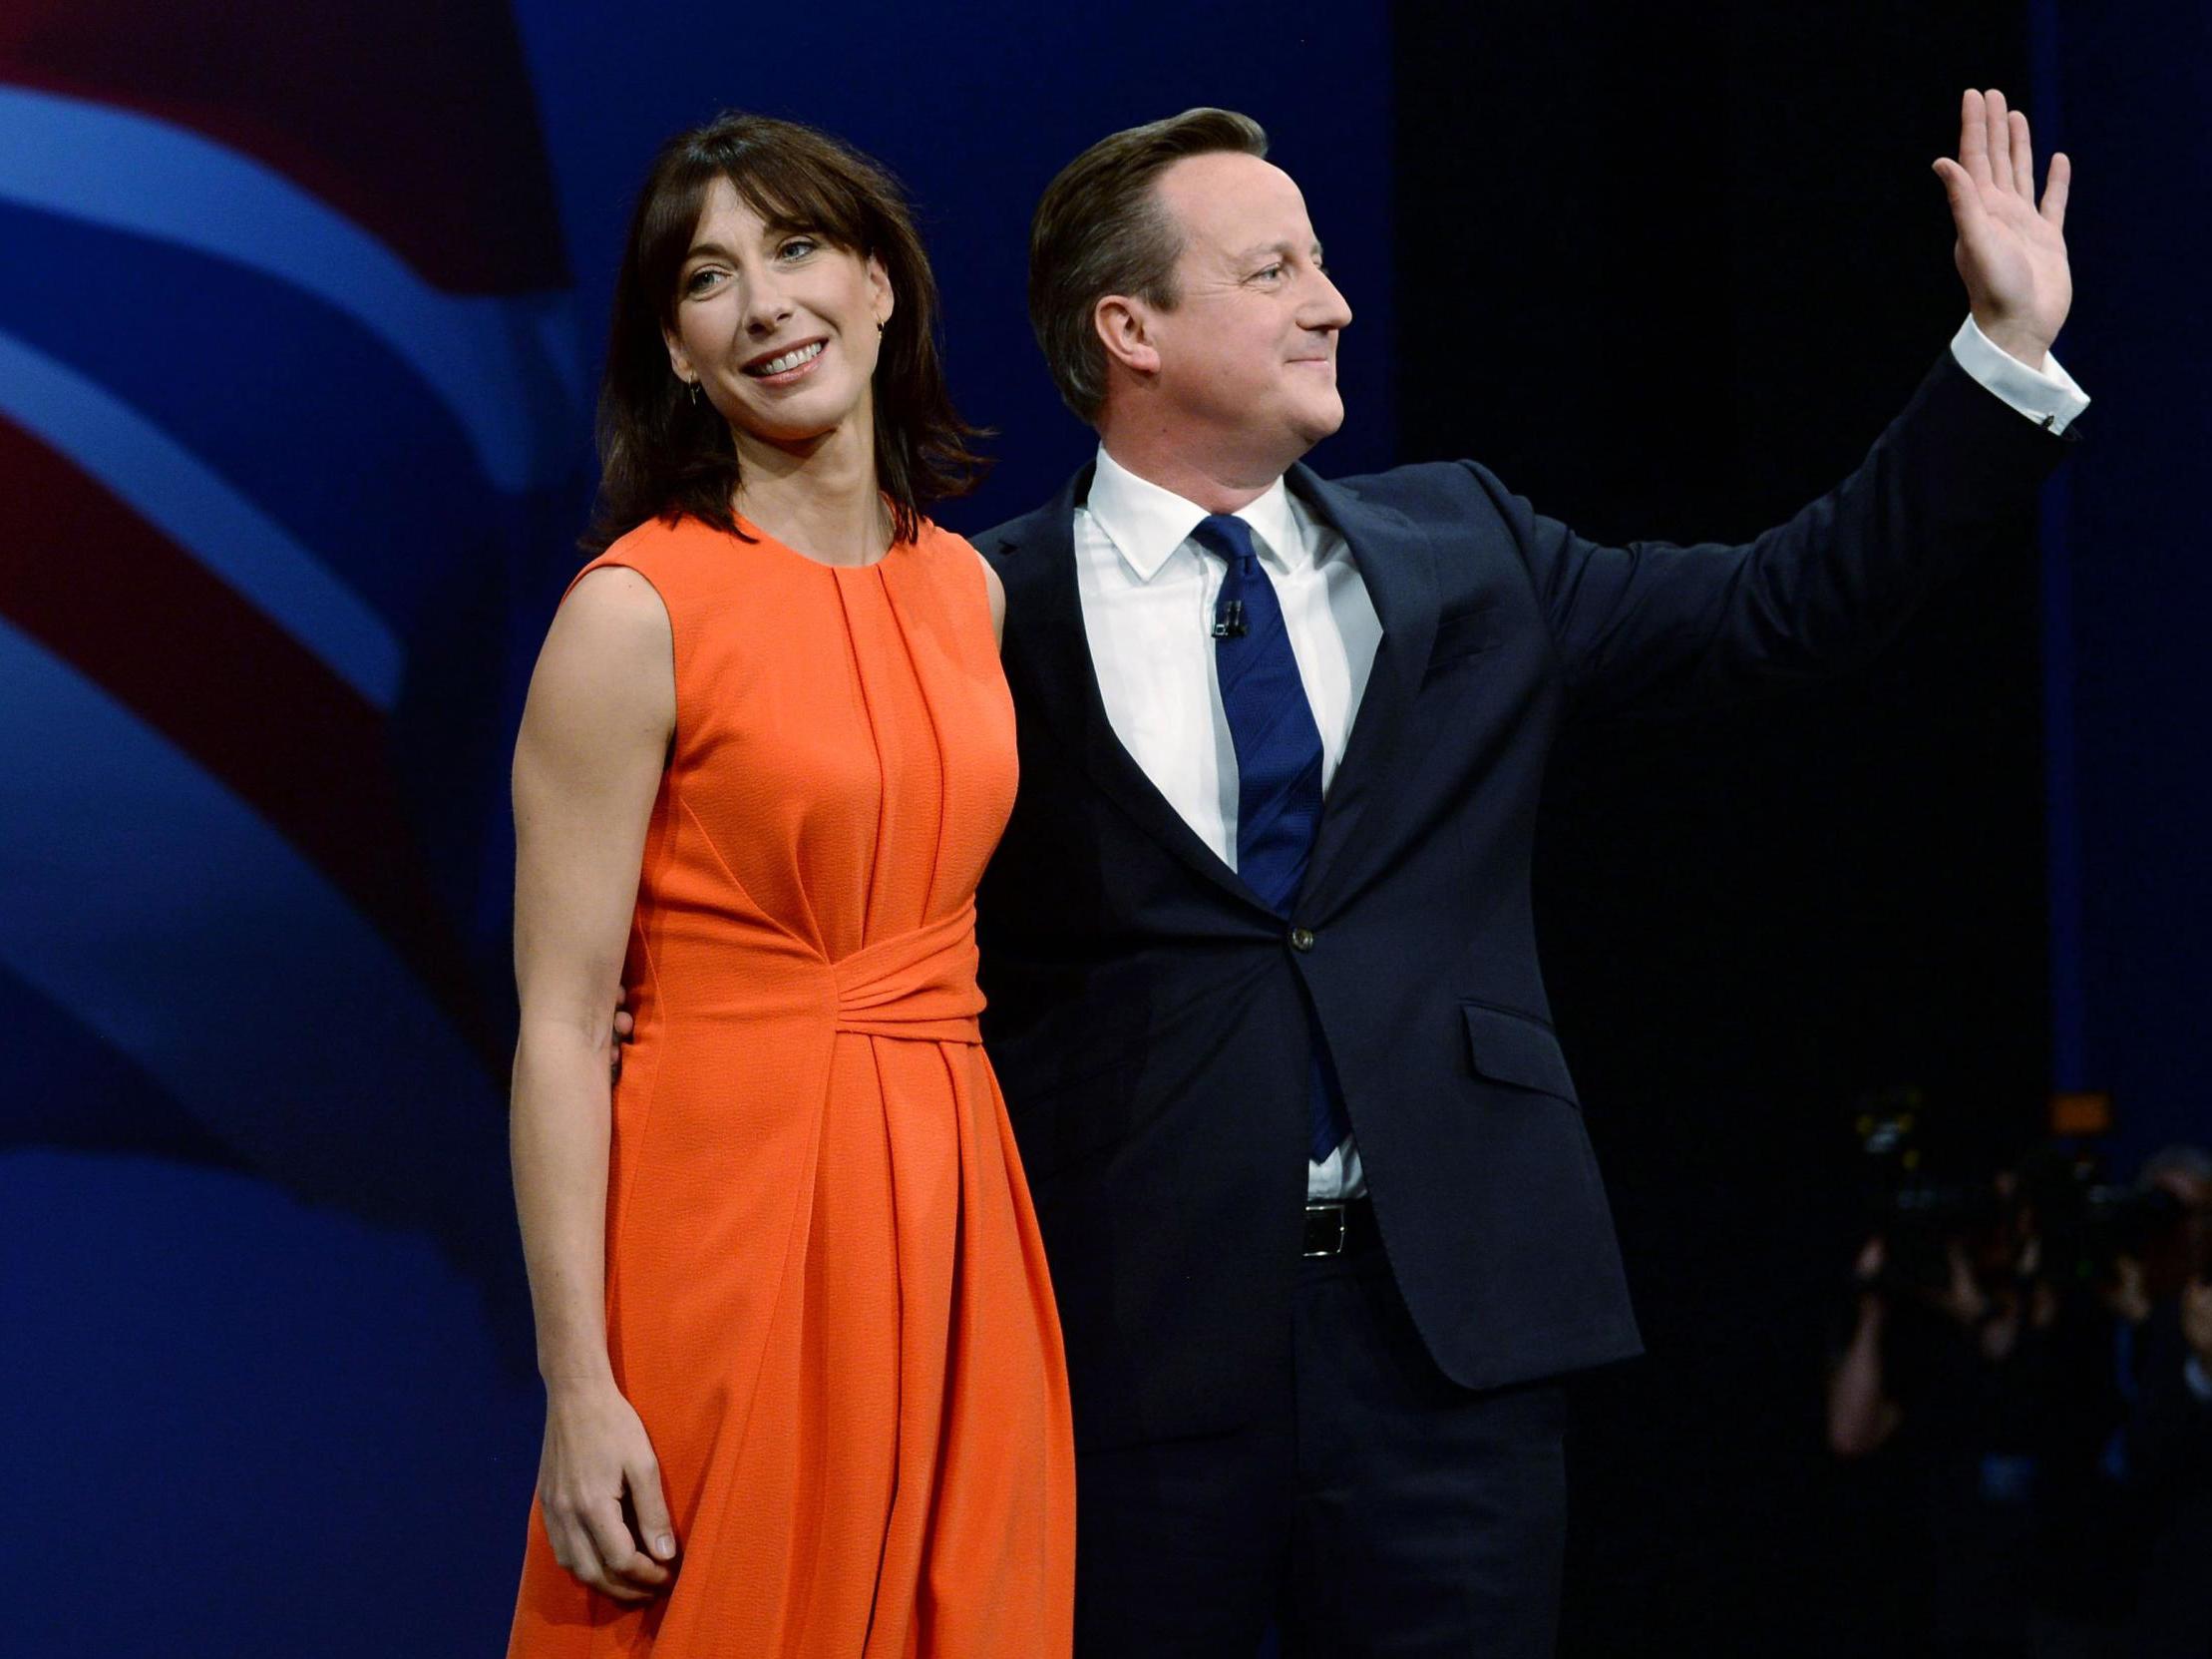 David Cameron says general election result is the 'end of Corbynism'